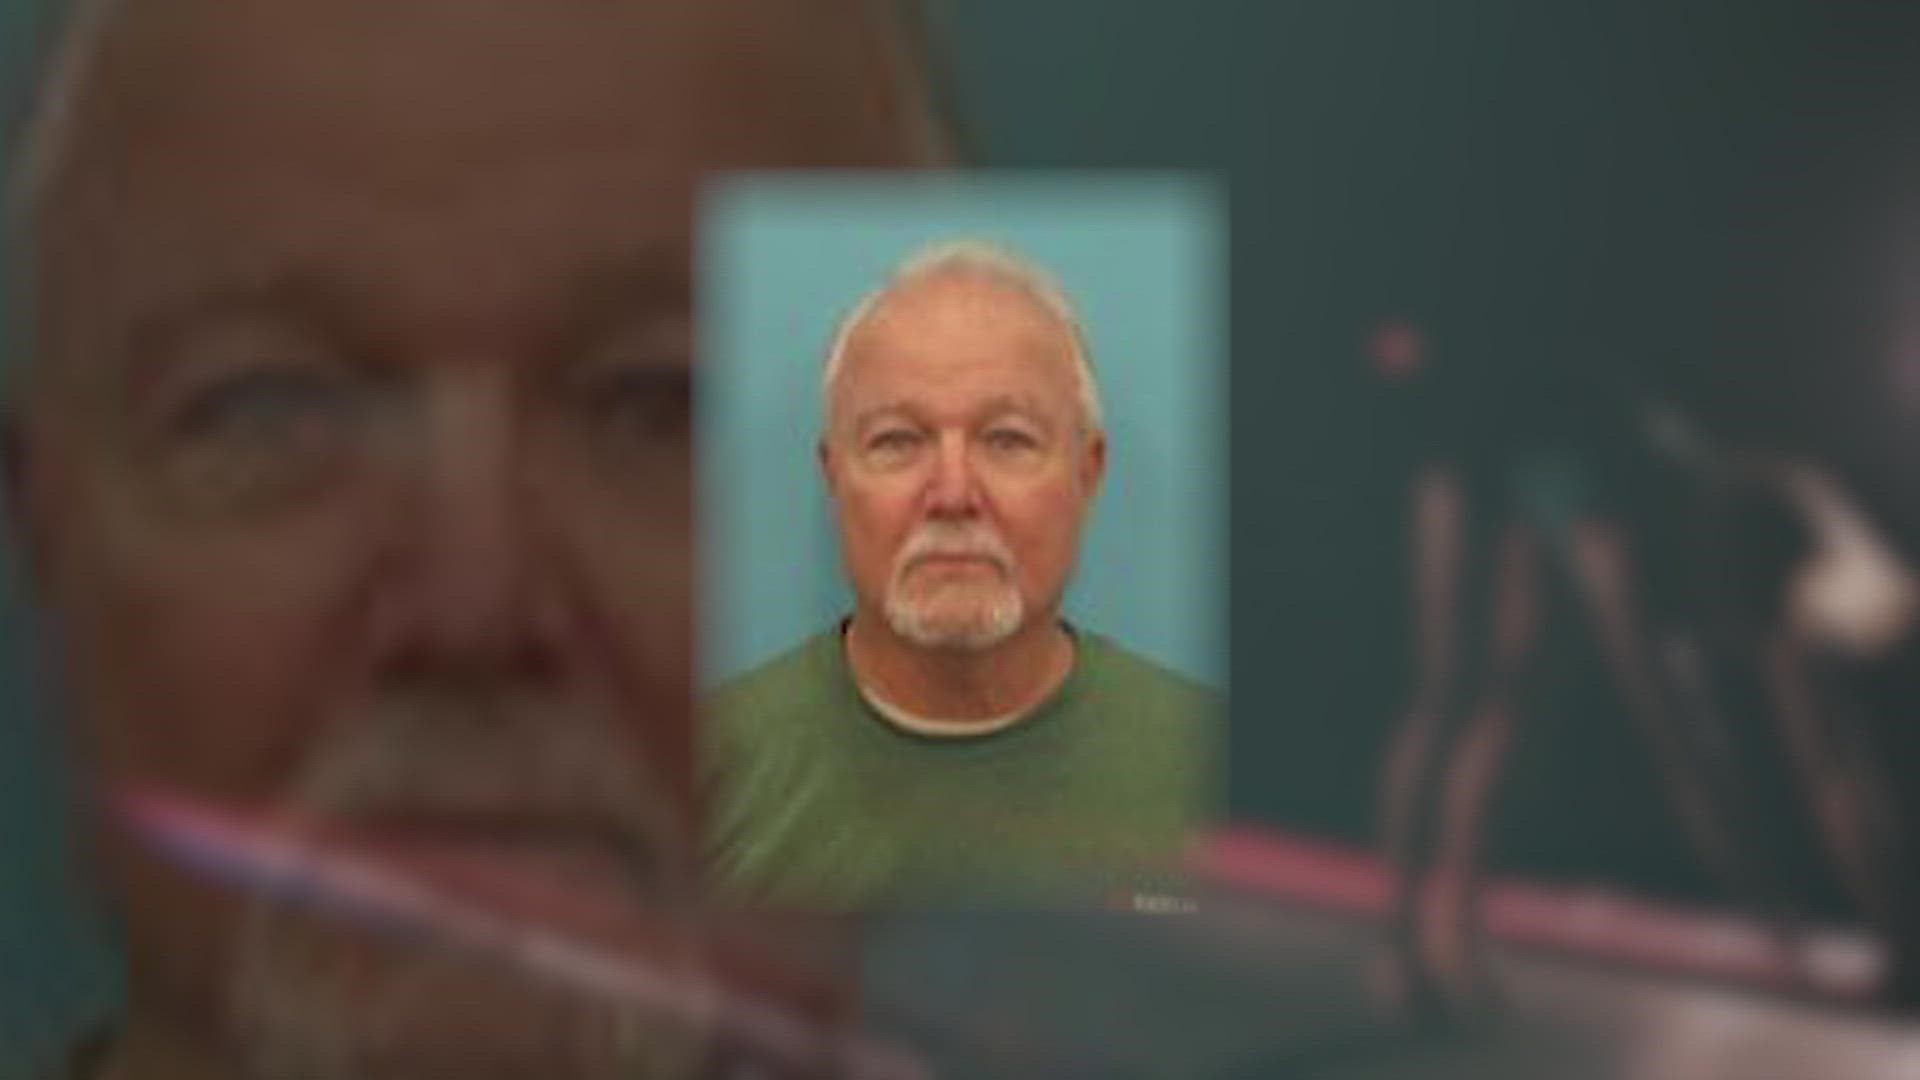 The nine-year-old girl alleges 74-year-old Mike Spiller put his hand inside her leotard during a practice at the Boerne Gymnastics Center in April.